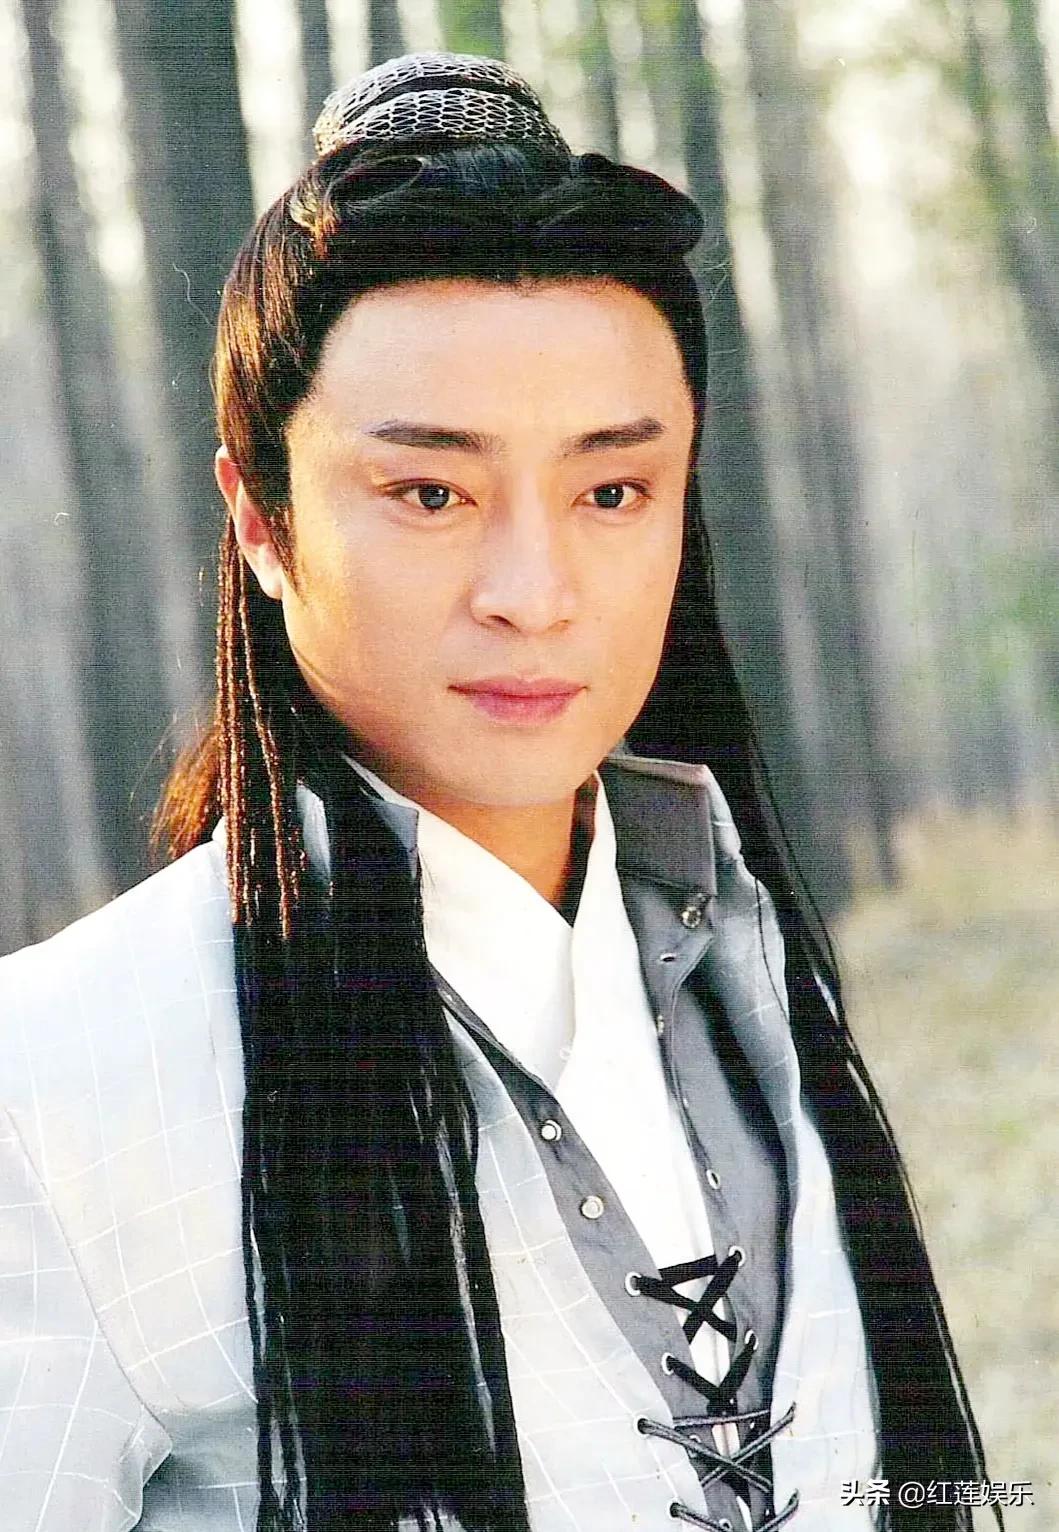 furniture Separate Digital He Zhonghua, born in Panshi City, Jilin Province, is a martial arts star,  and his "Xie Xiaofeng" is very handsome and classic - laitimes